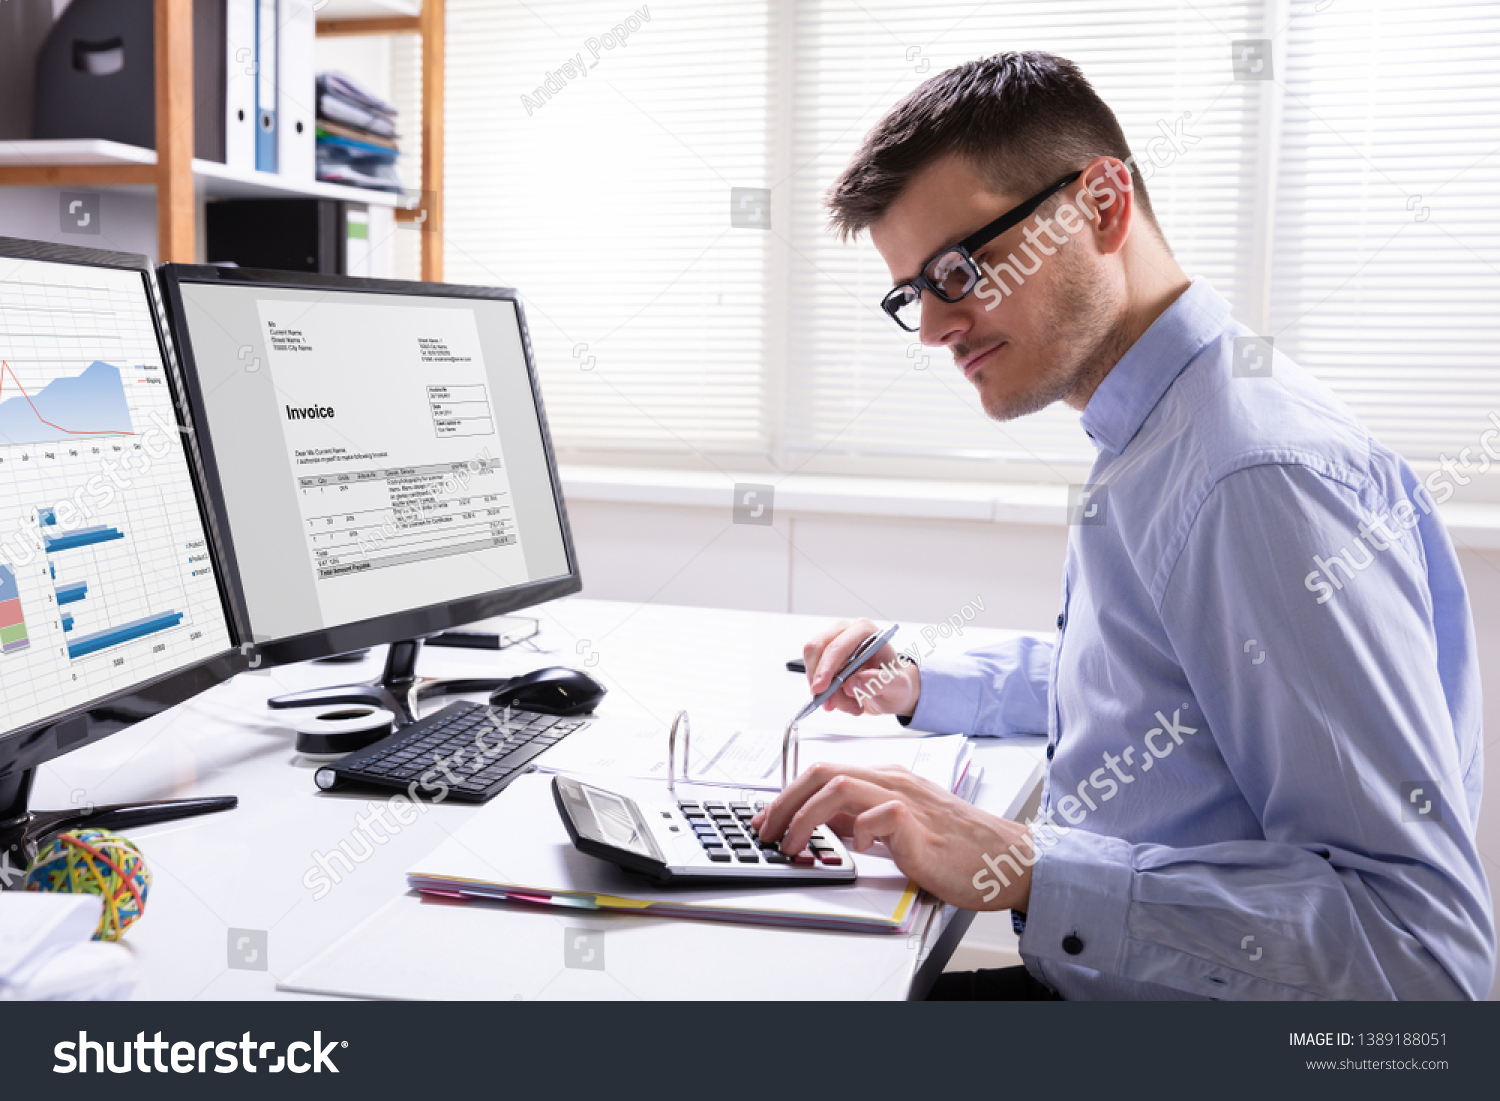 Side View Of Businessman's Hand Calculating Invoice At Workplace #1389188051